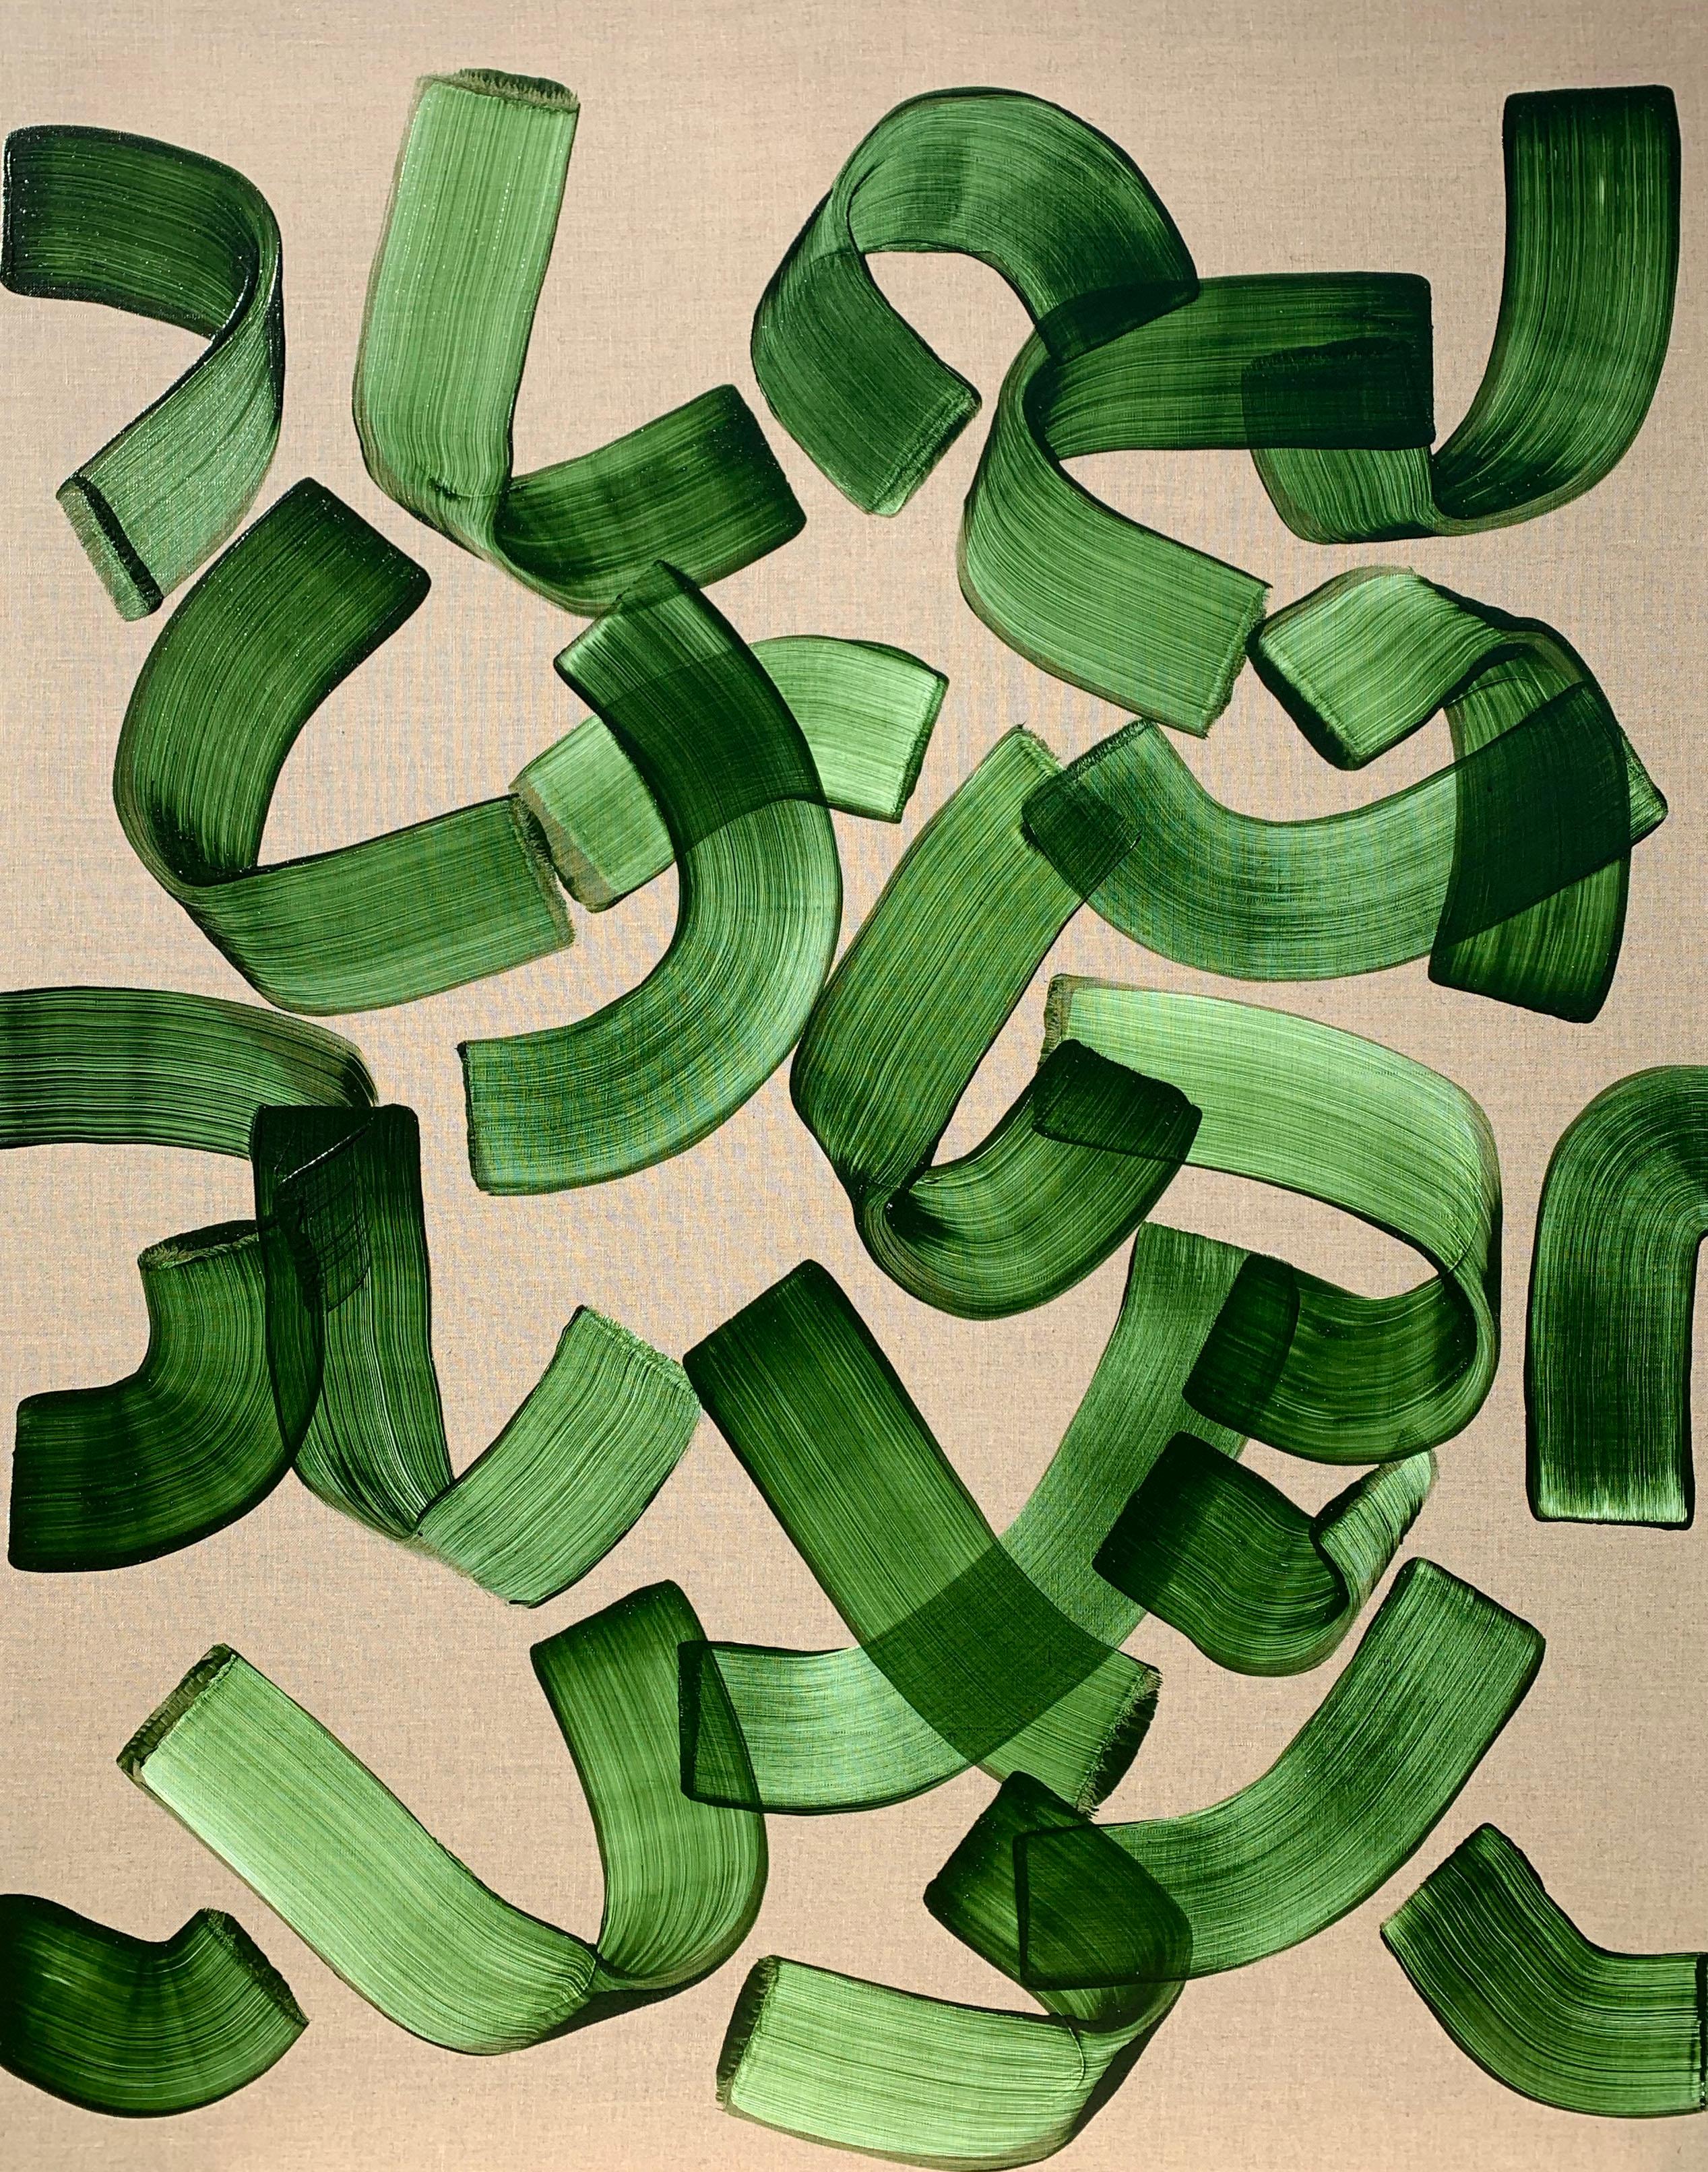 Maria José Benvenuto  Abstract Painting - 'Overlapping olive green strokes', 2021, Colourful abstract work on linen